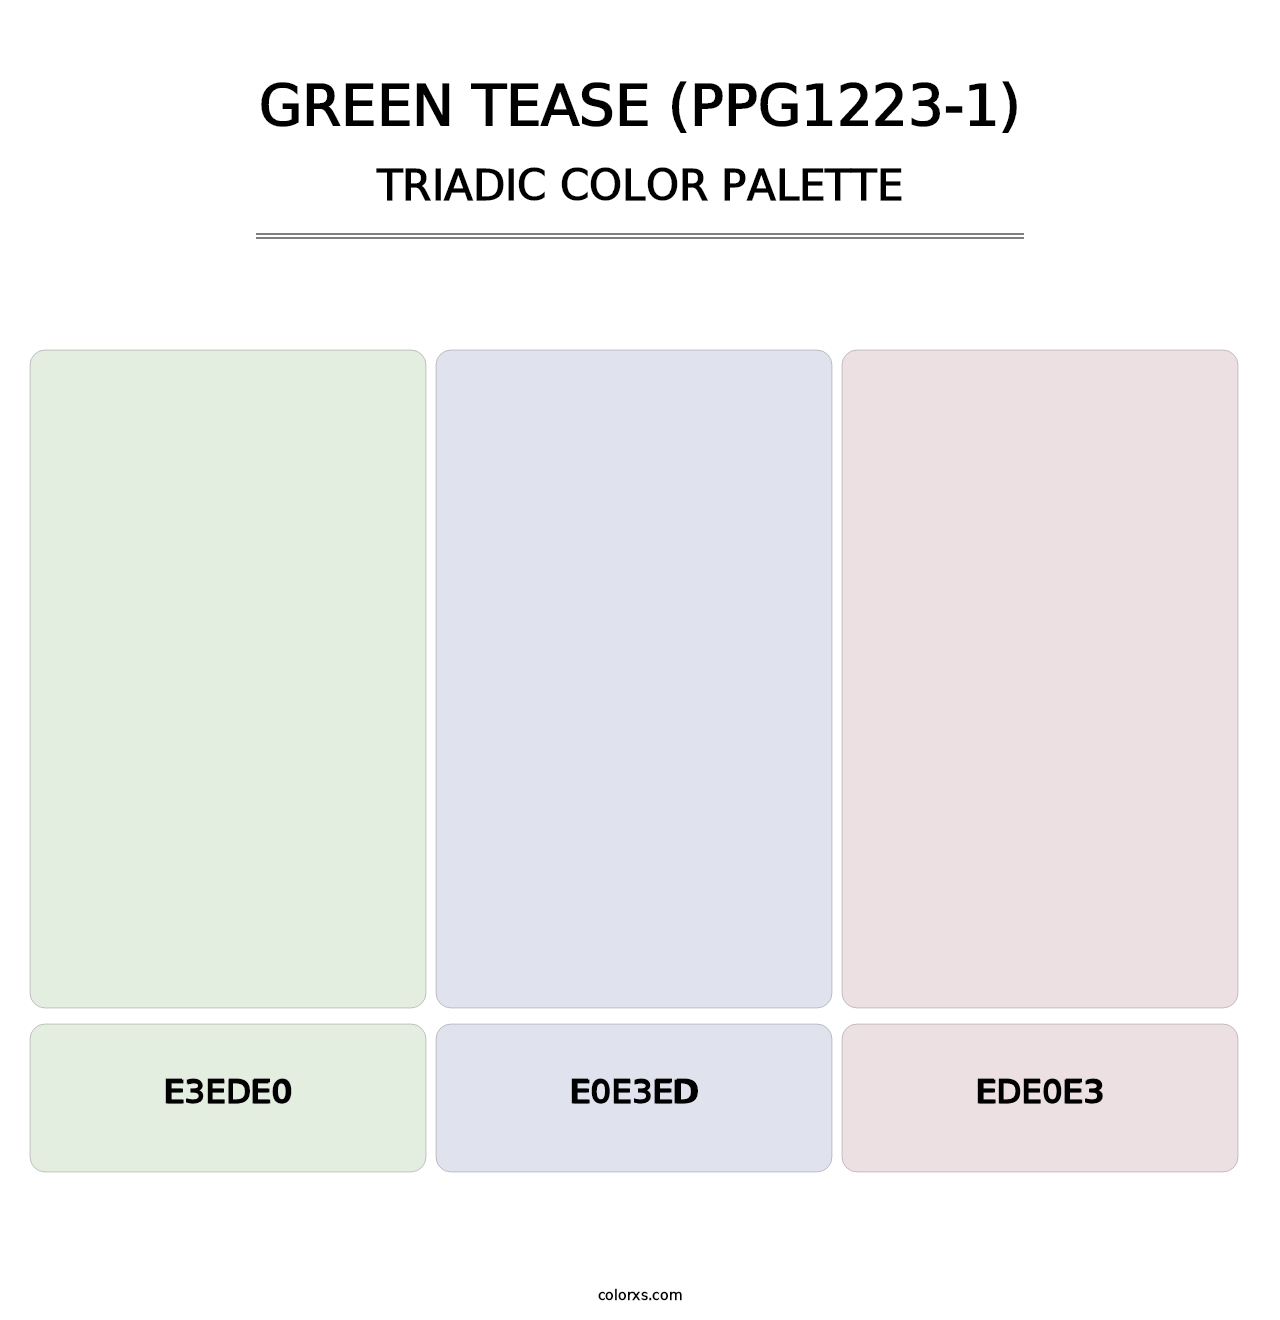 Green Tease (PPG1223-1) - Triadic Color Palette